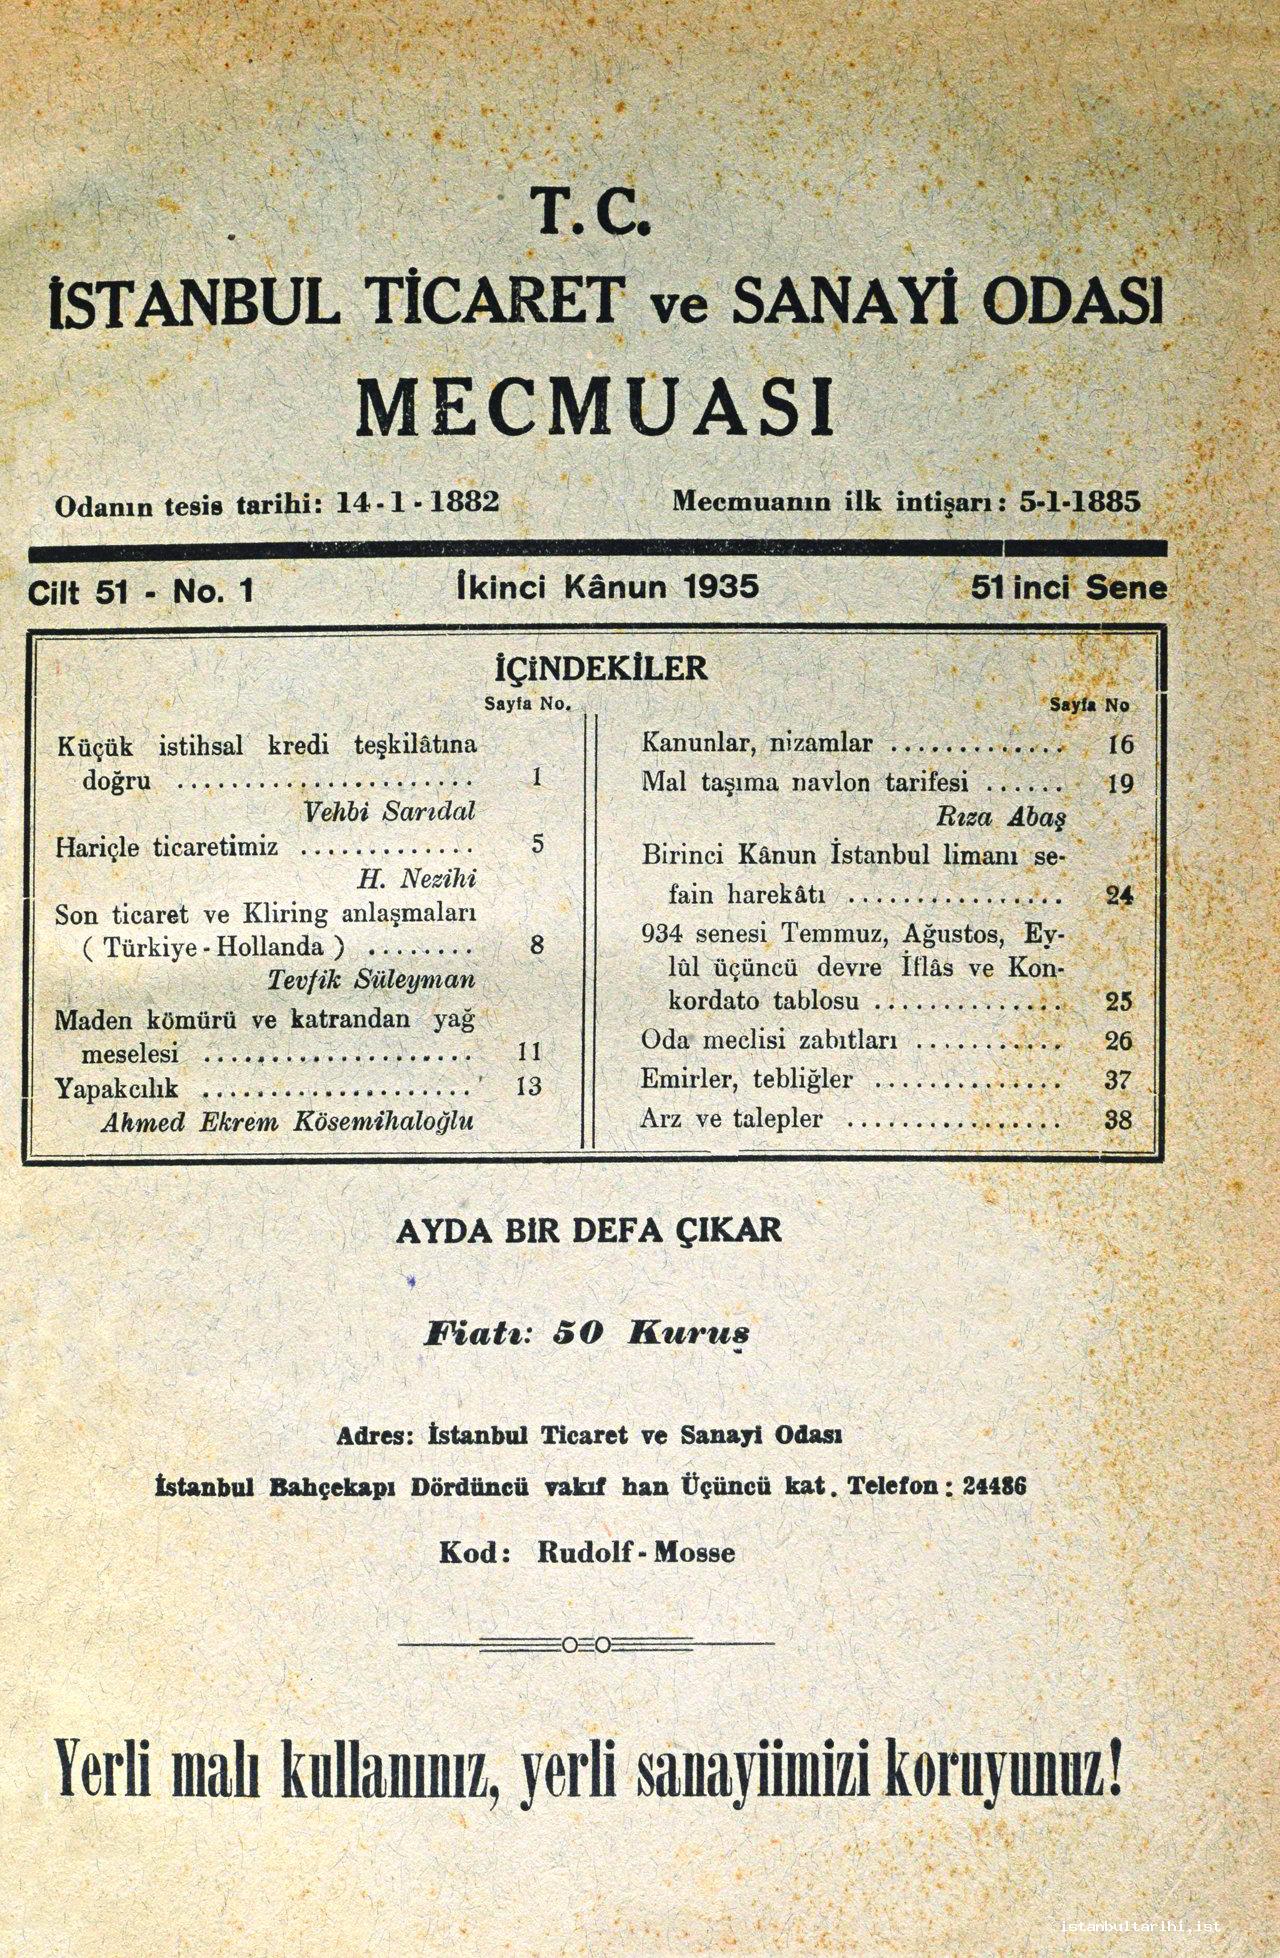 1- An issue from 1935 of the Journal of Istanbul Chamber of Commerce and Industry